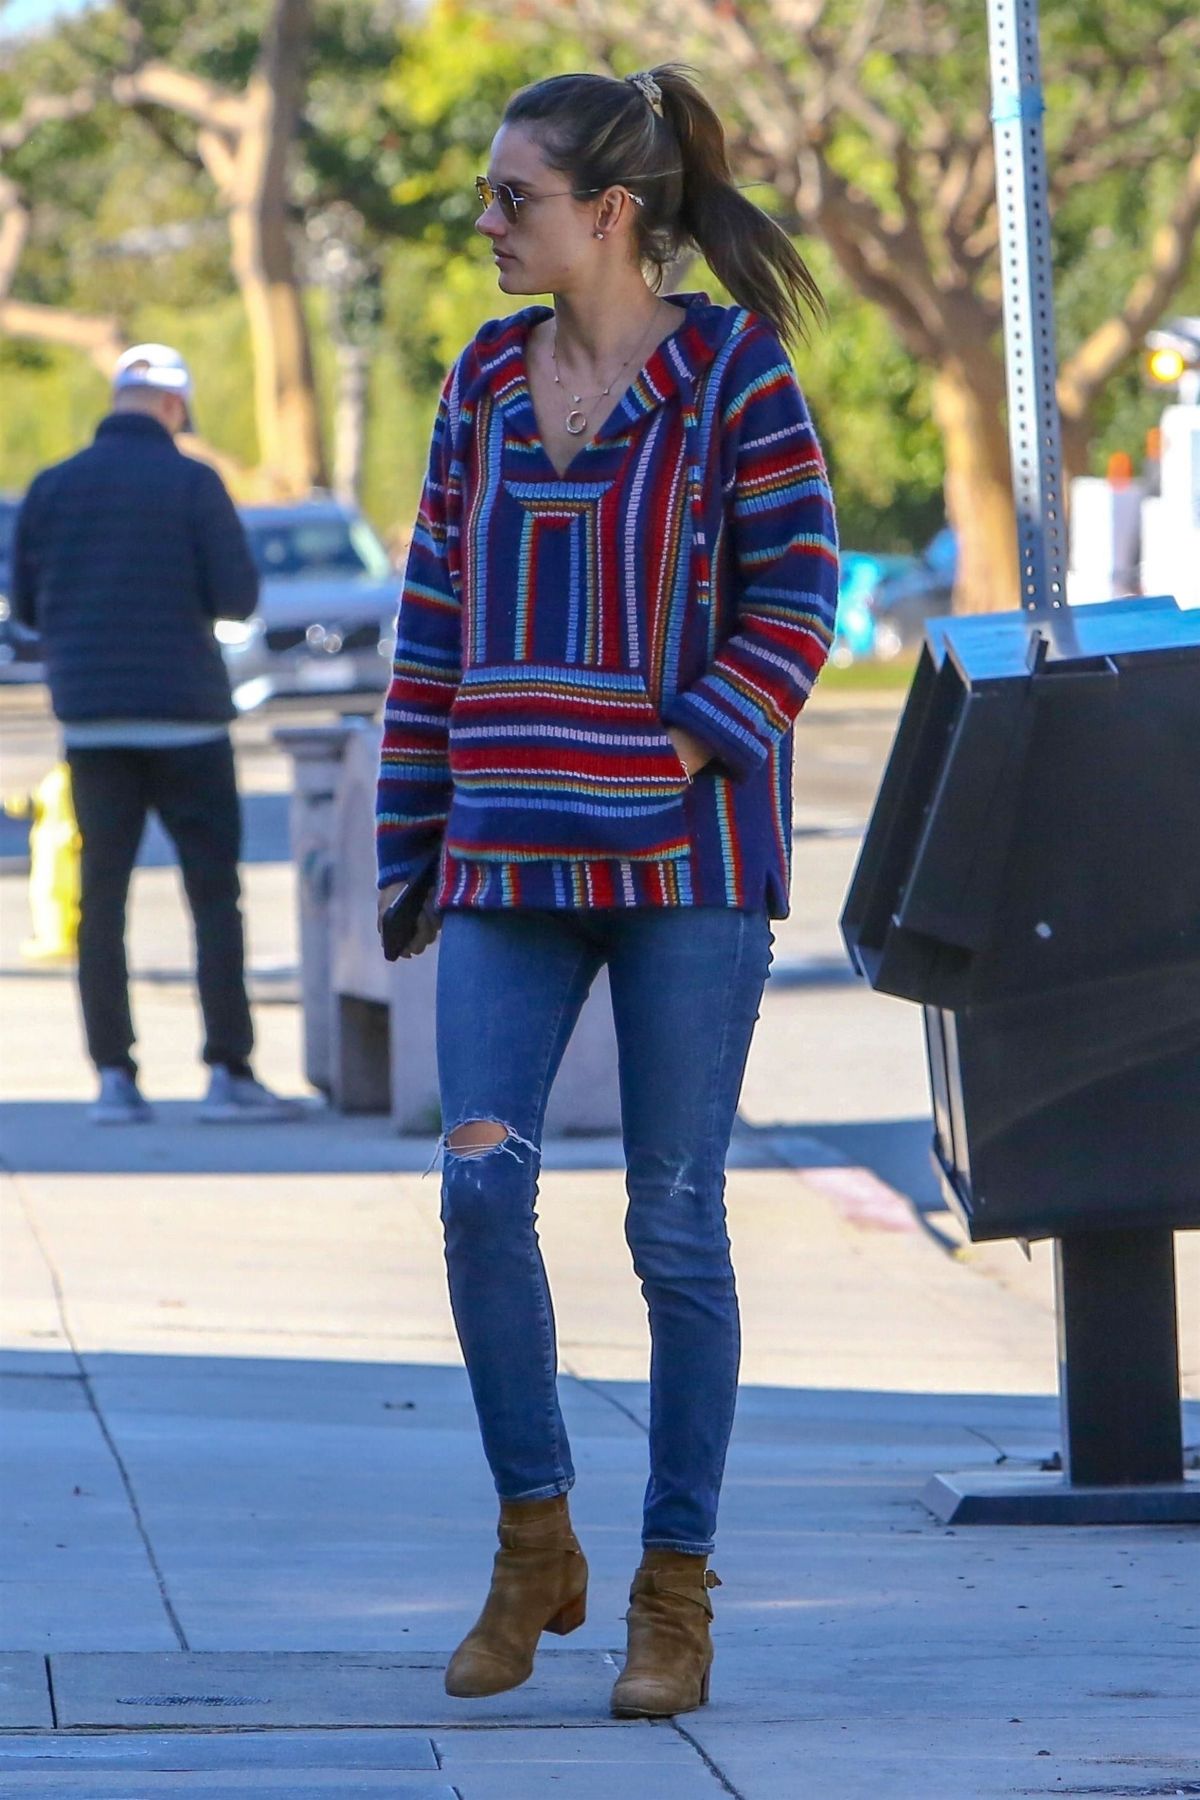 alessandra-ambrosio-out-and-about-in-brentwood-02-11-2019-0.jpg